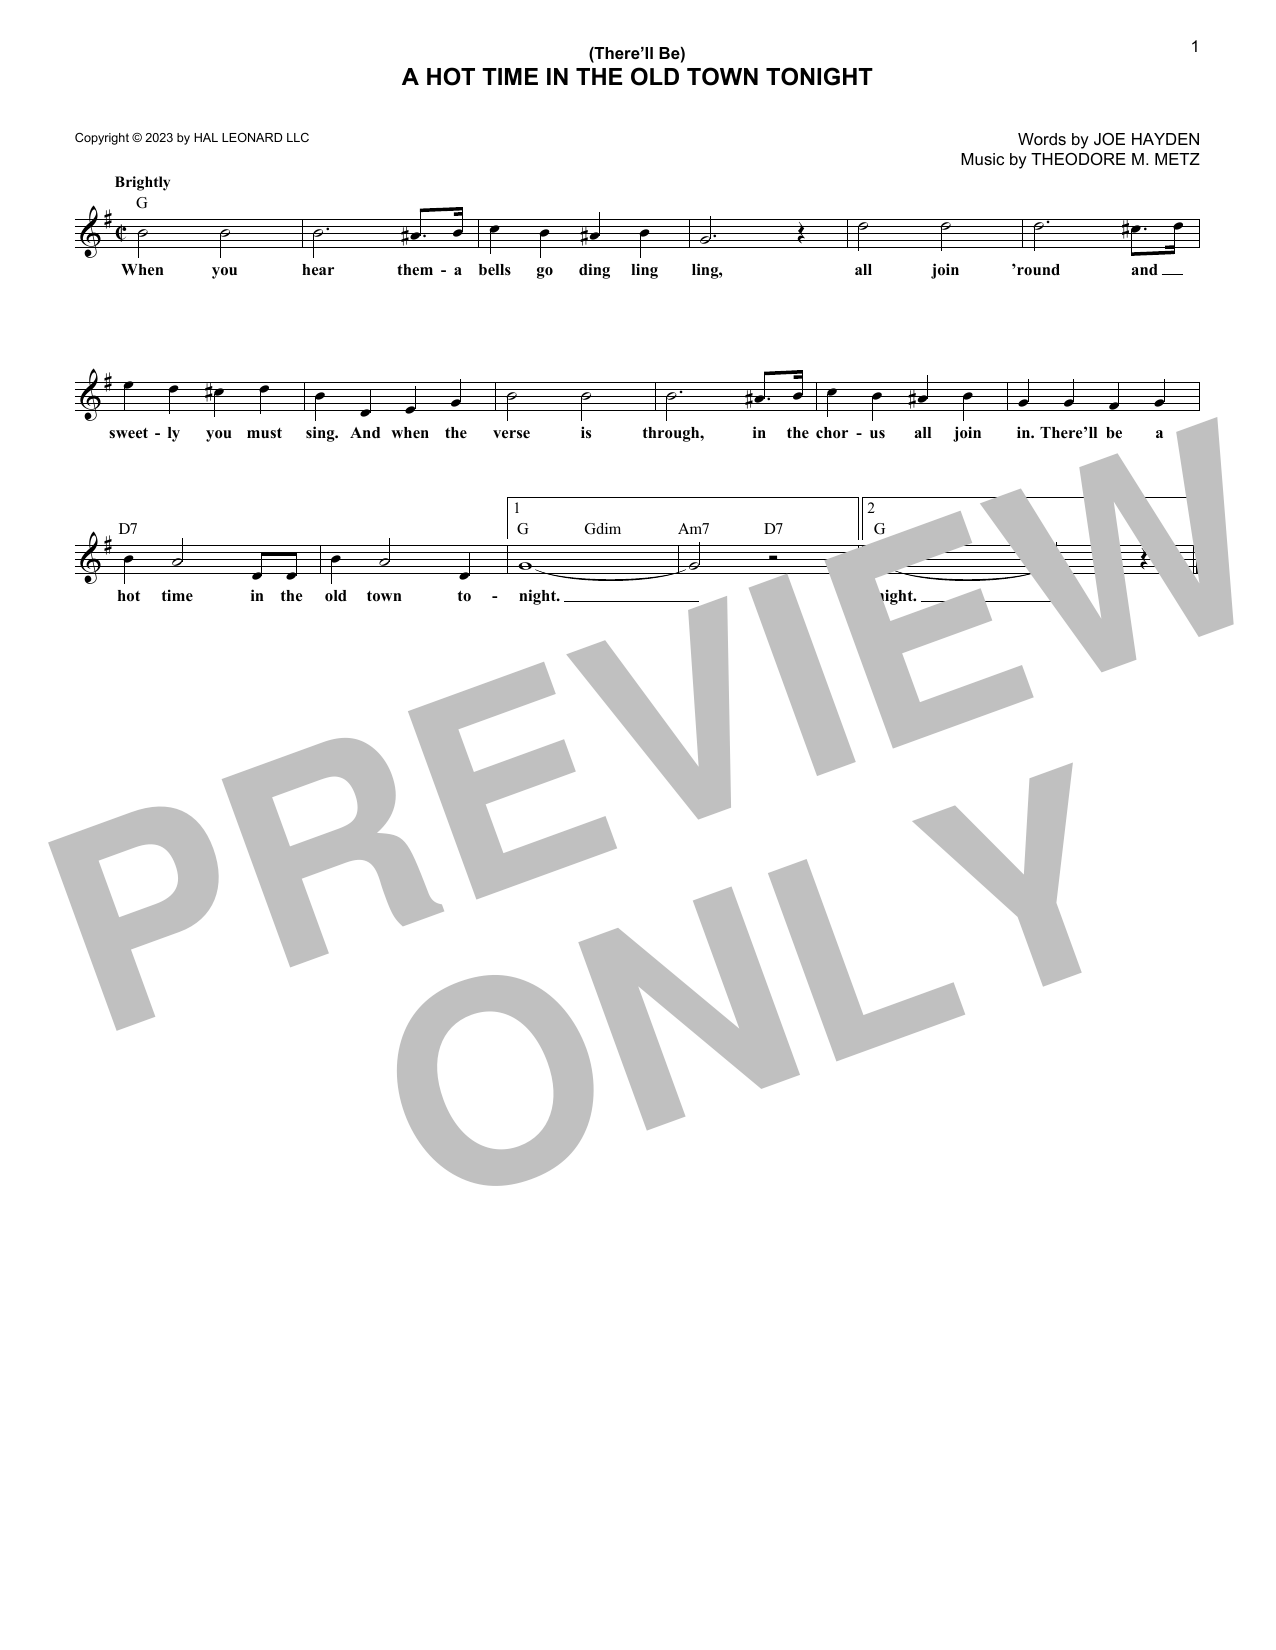 Download Joe Hayden and Theodore M. Metz (There'll Be) A Hot Time In The Old Tow Sheet Music